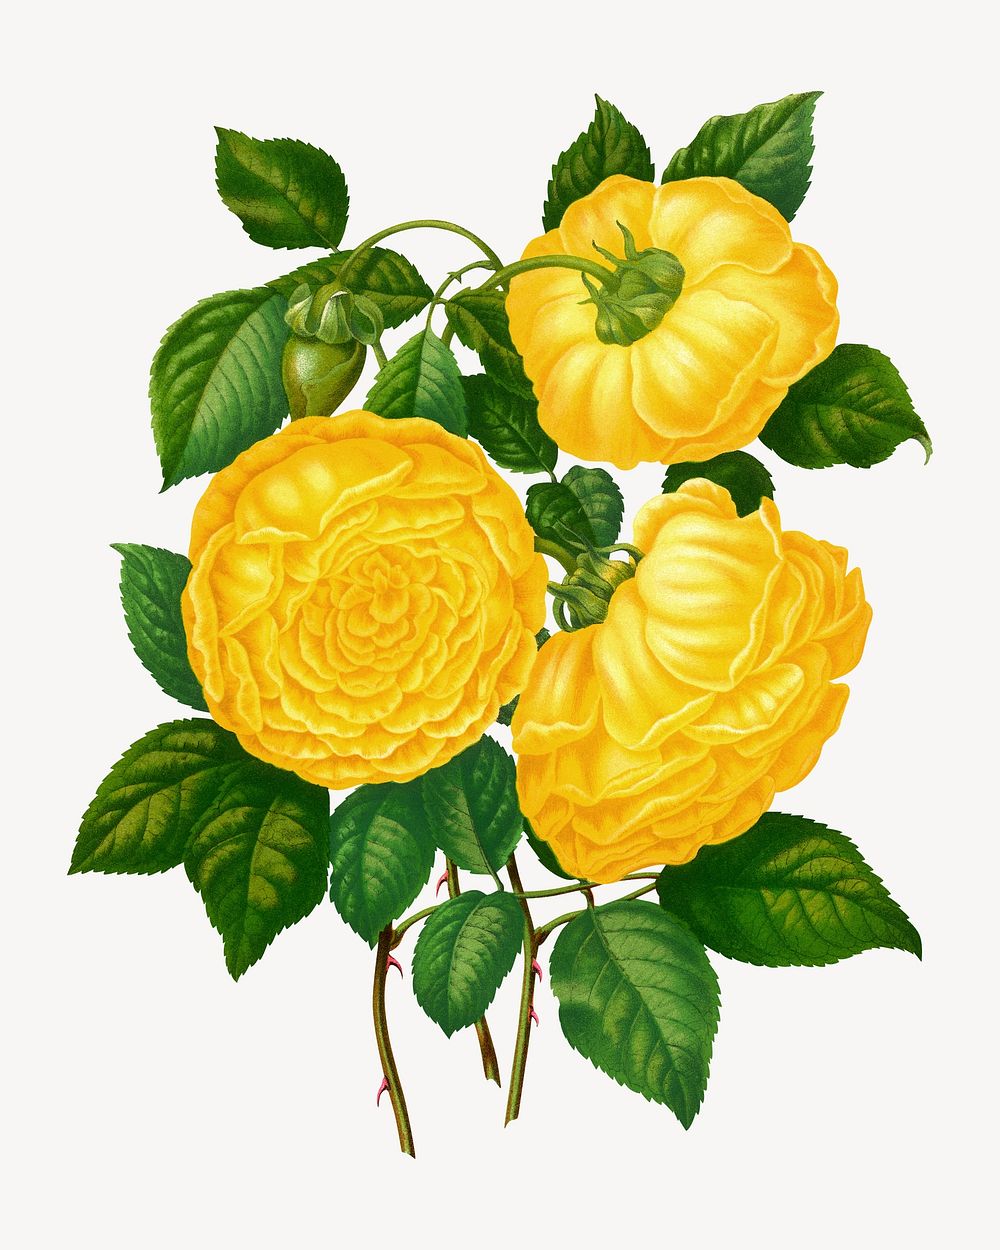 Vintage yellow roses illustration. Remixed from our own original 1879 edition of Nederlandsche Flora en Pomona. 